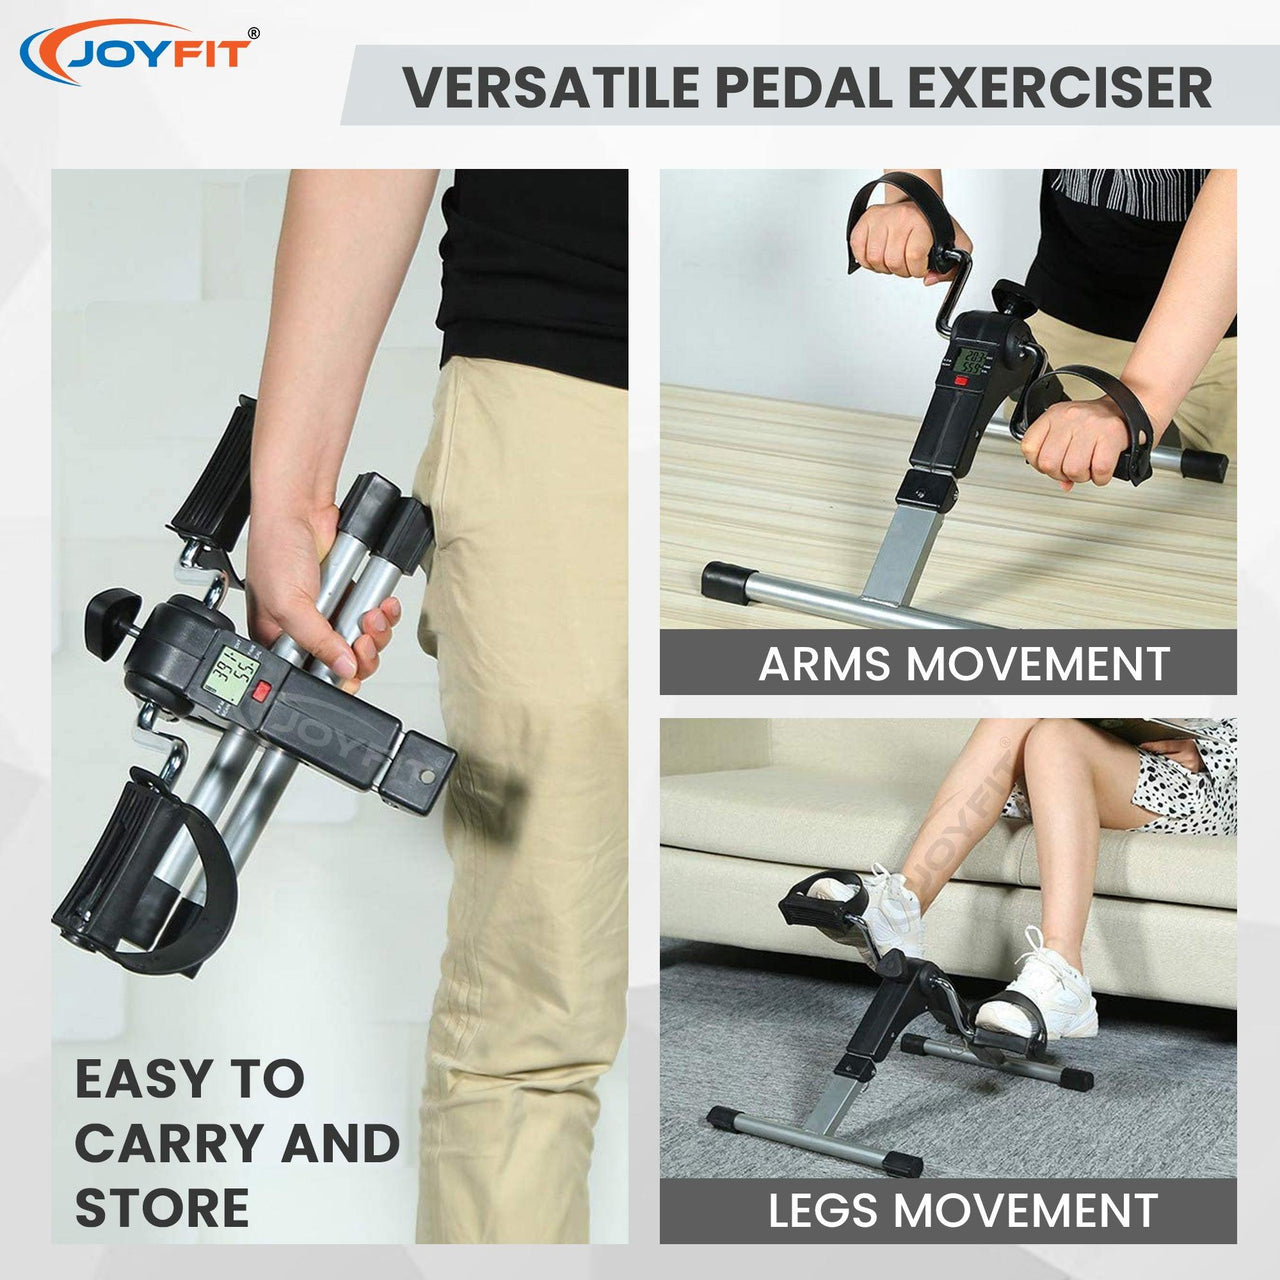 compact pedal exerciser by joyfit